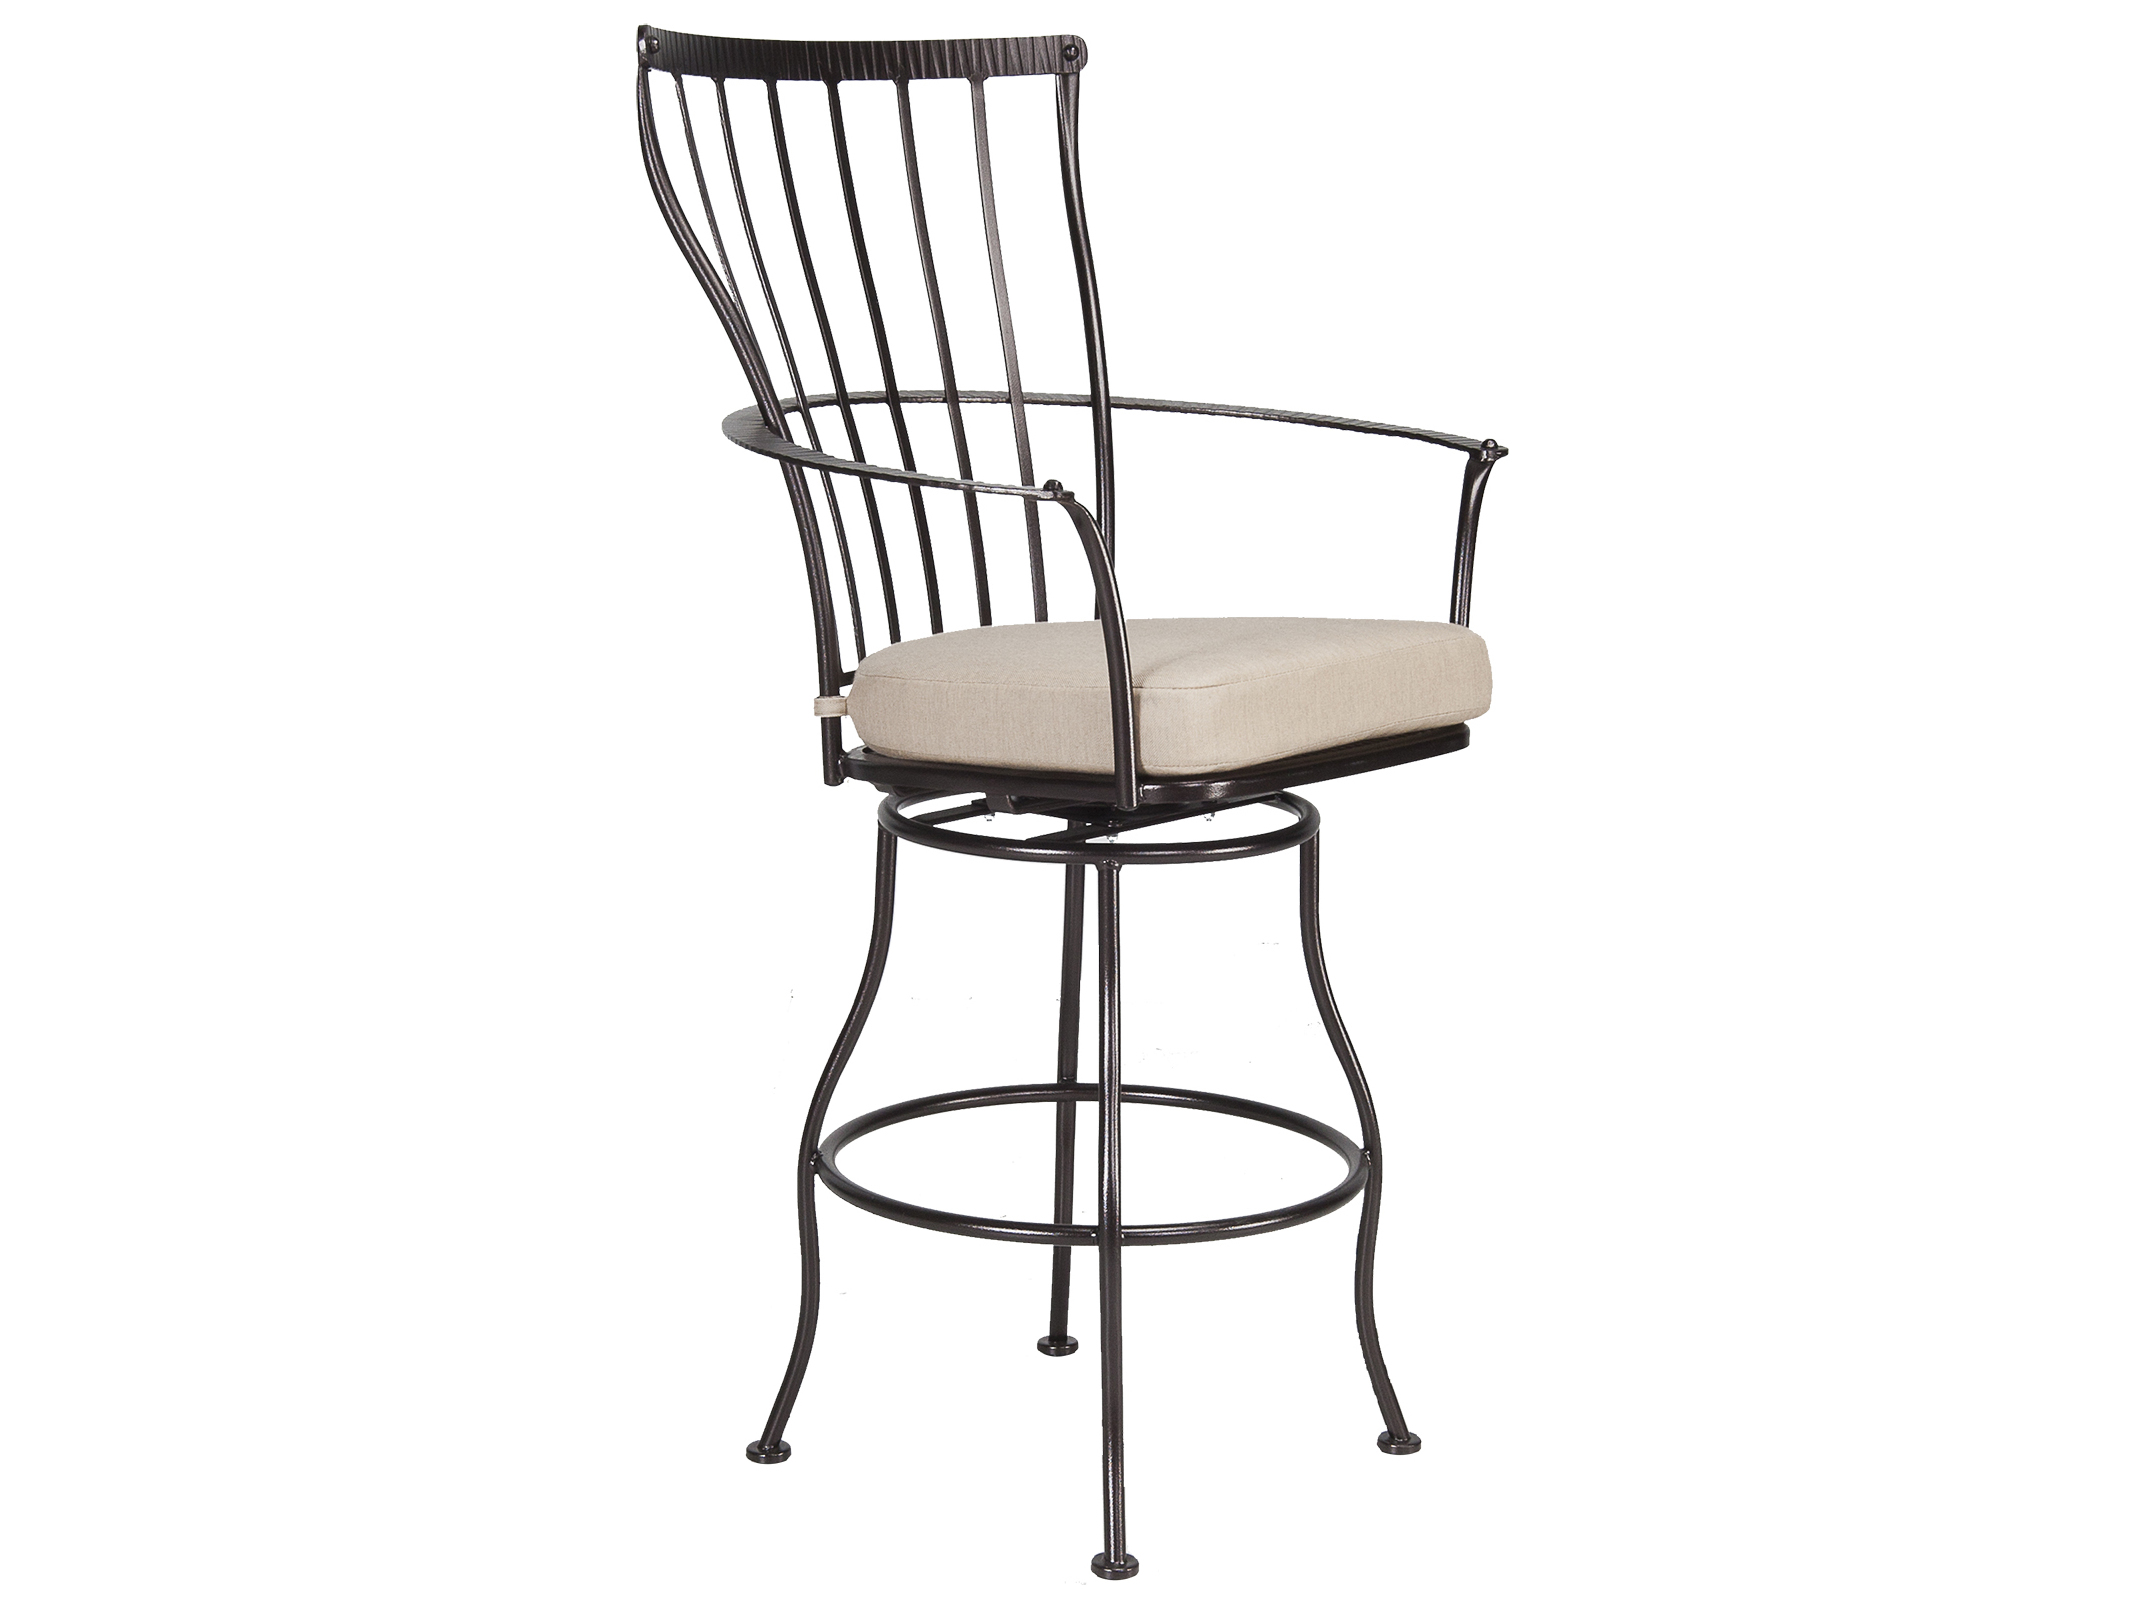 Ow Lee Monterra Wrought Iron Swivel Bar, Wrought Iron Bar Stools With Arms